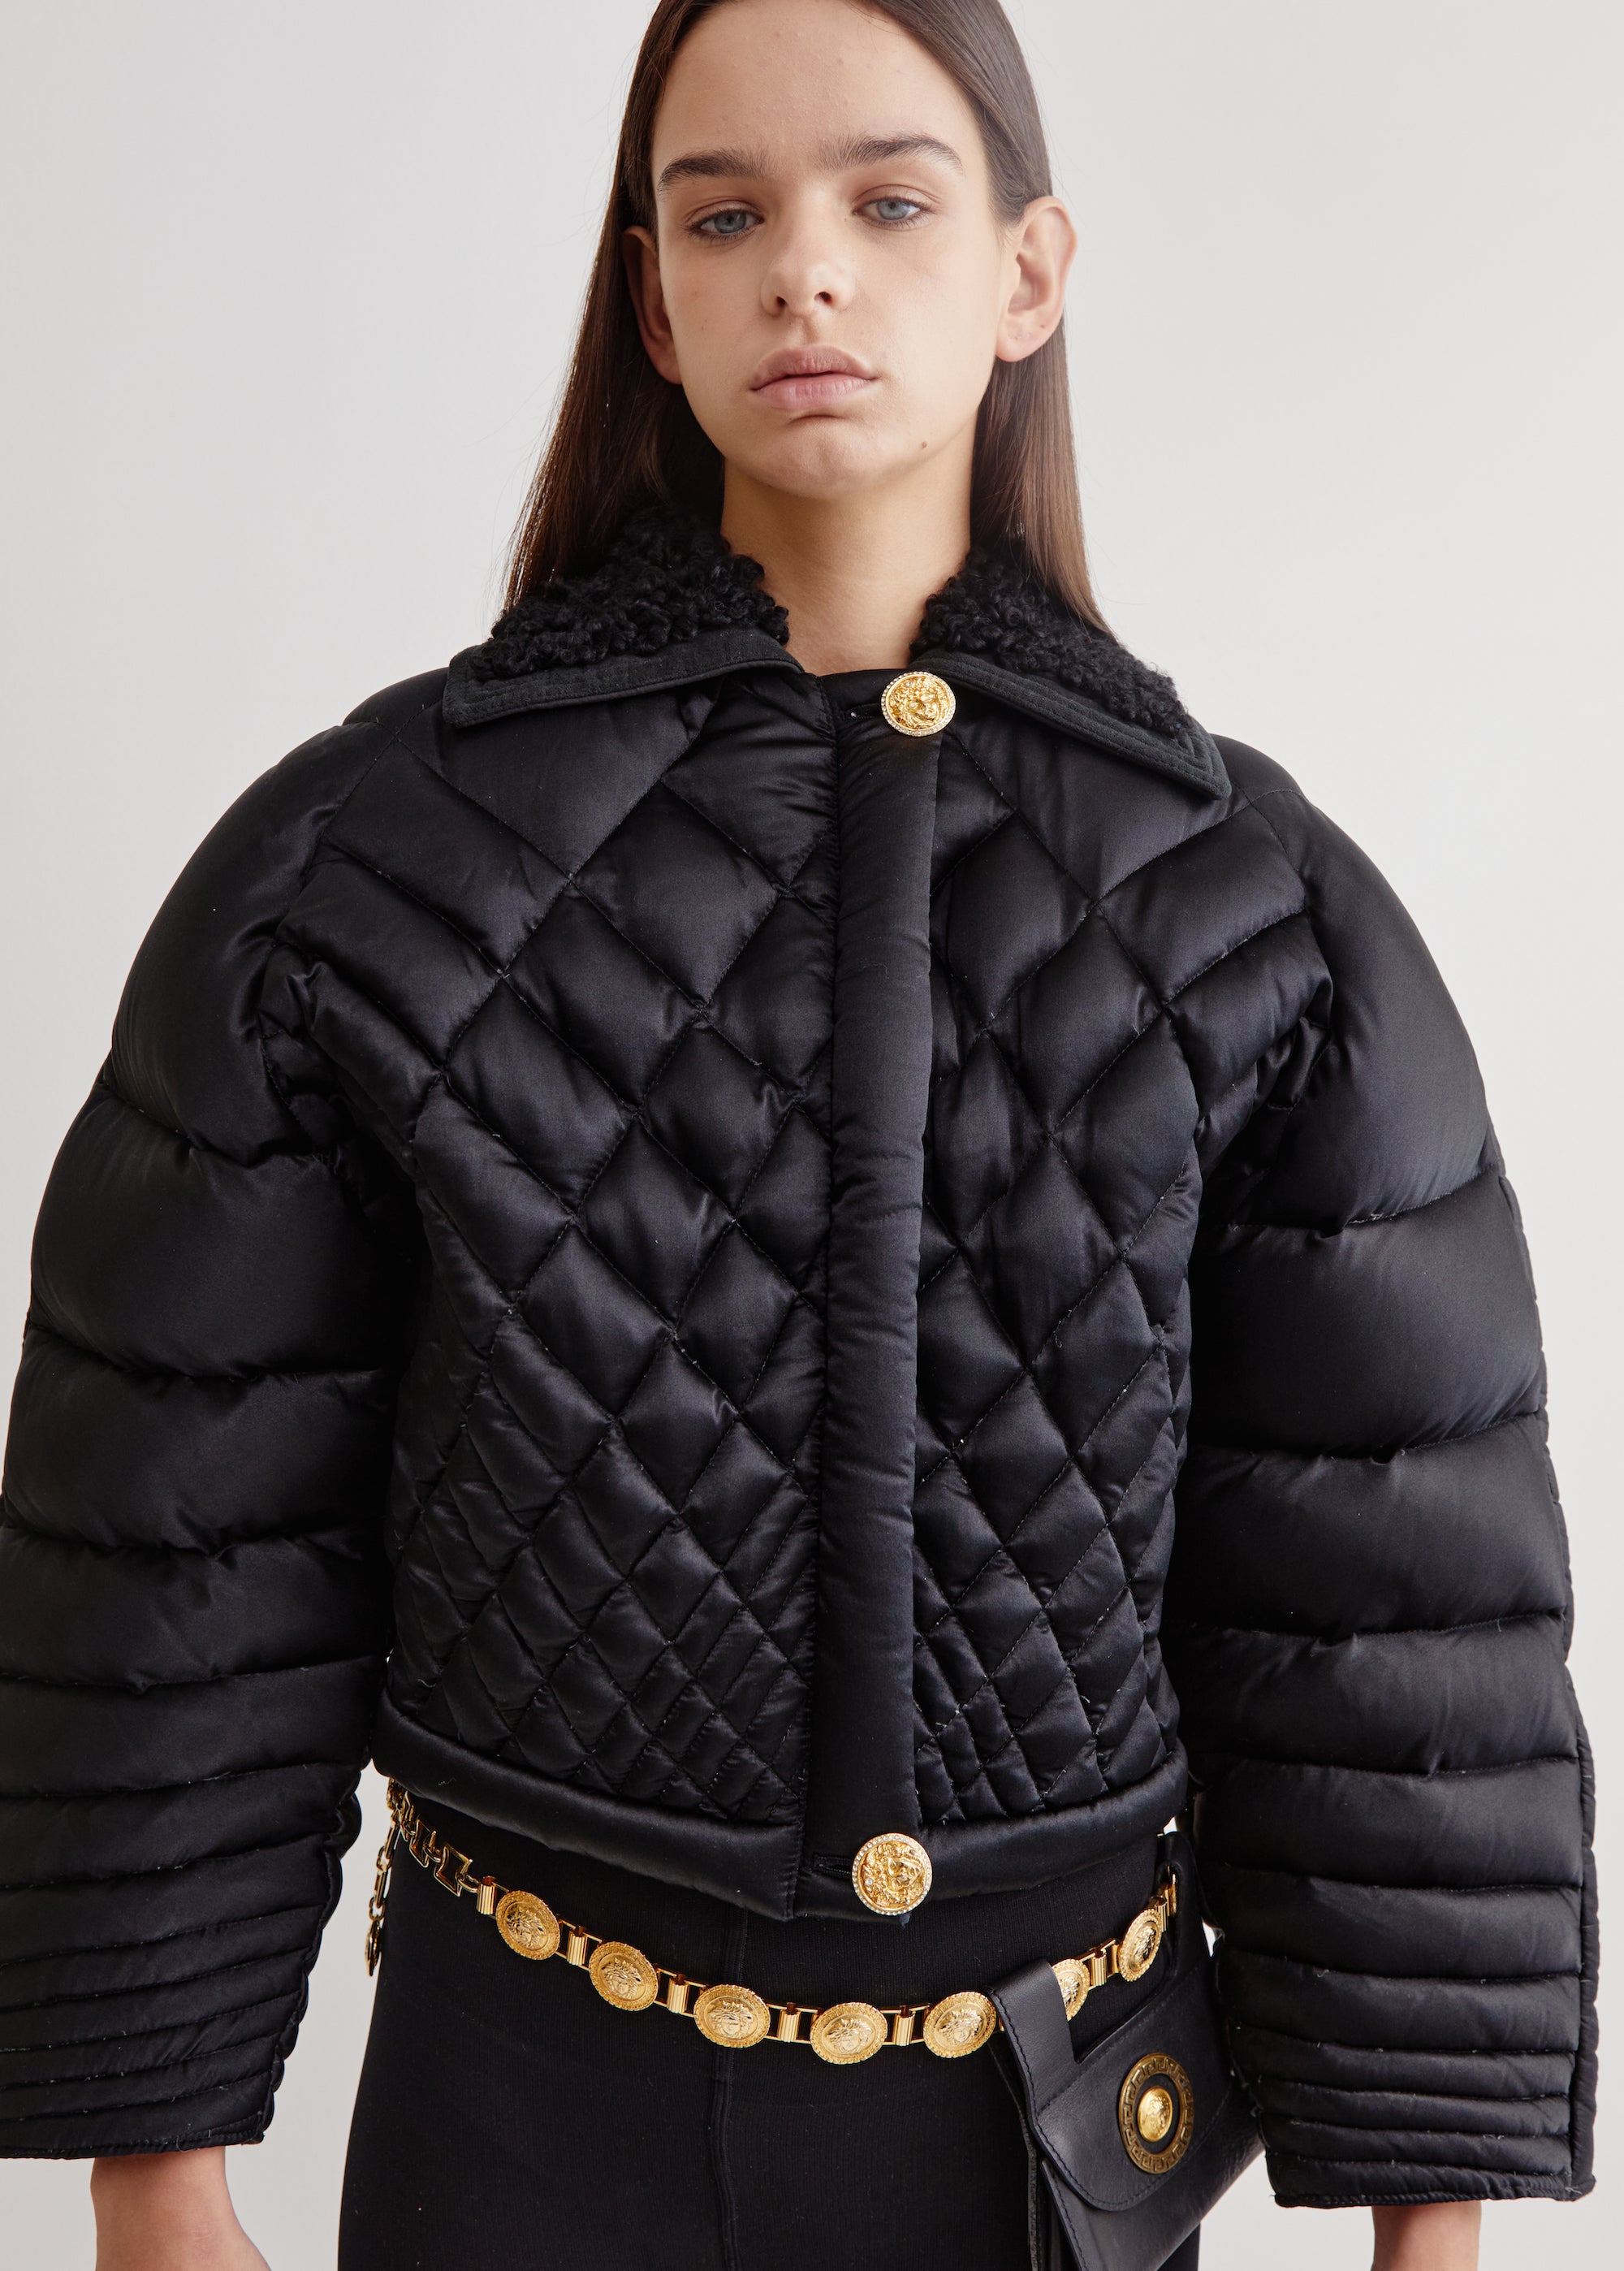 Gianni Versace <br> F/W 1992 Couture 'Miss S&M' runway puffer jacket